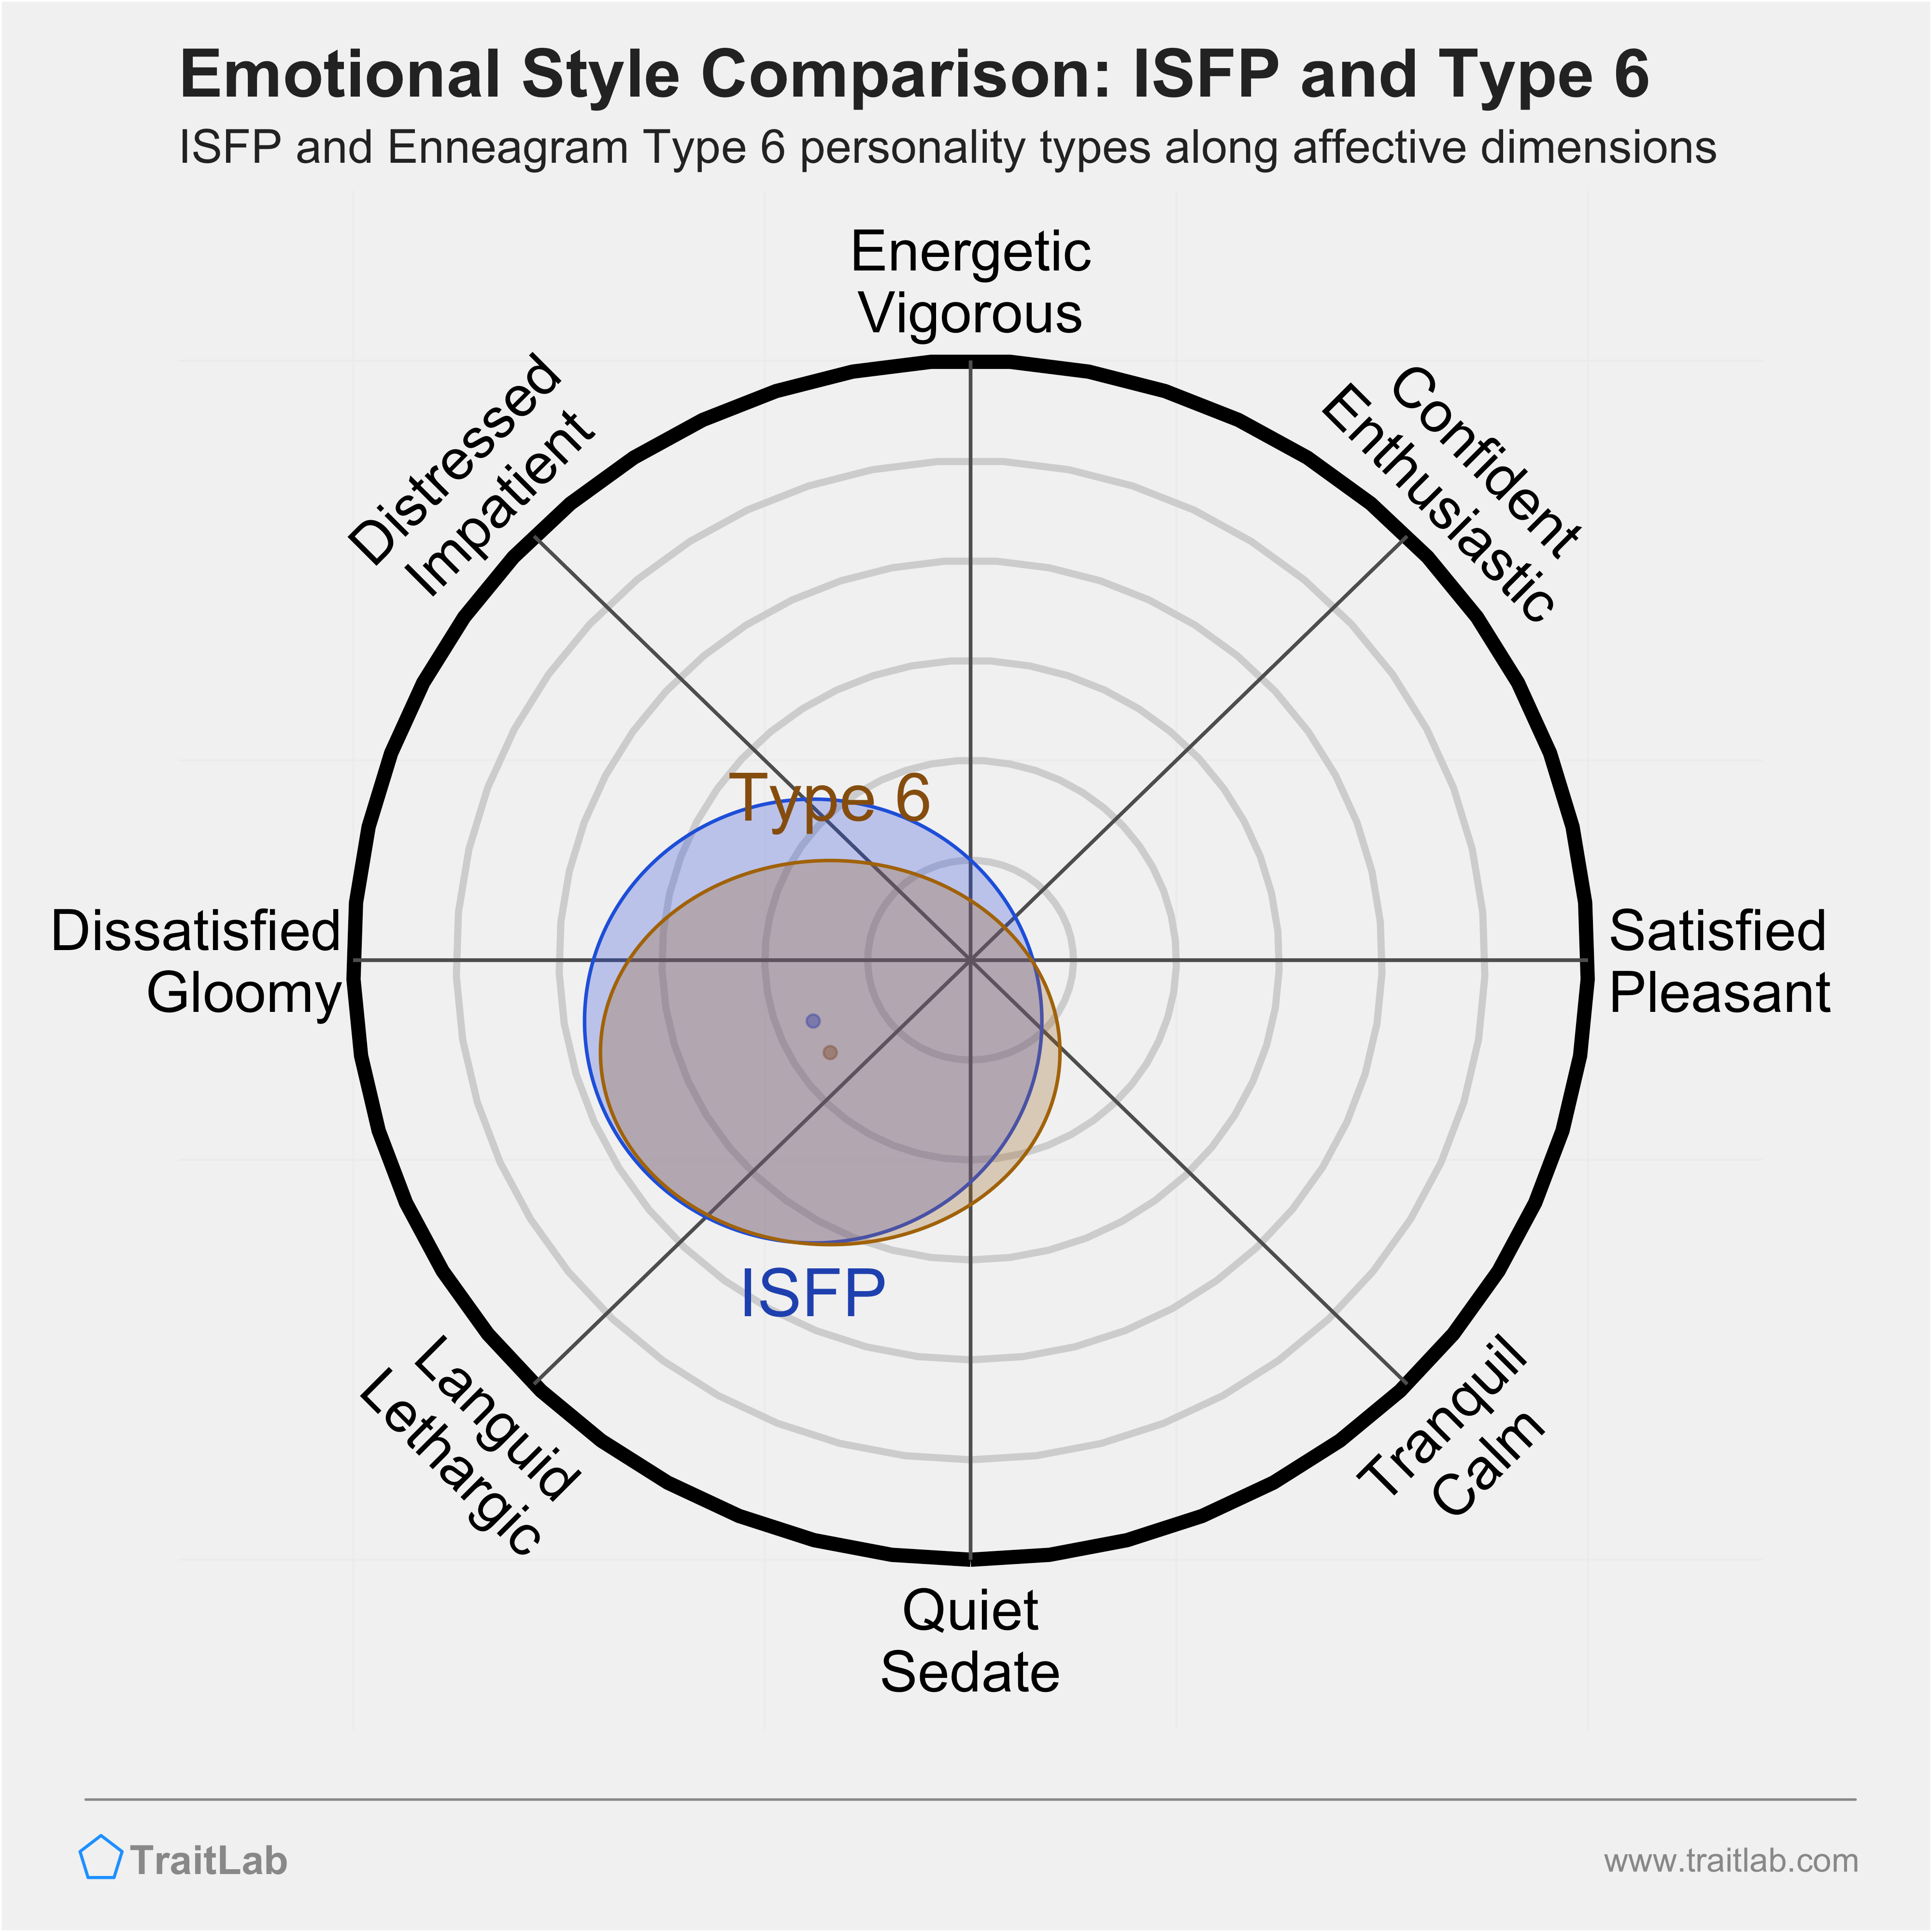 ISFP and Type 6 comparison across emotional (affective) dimensions